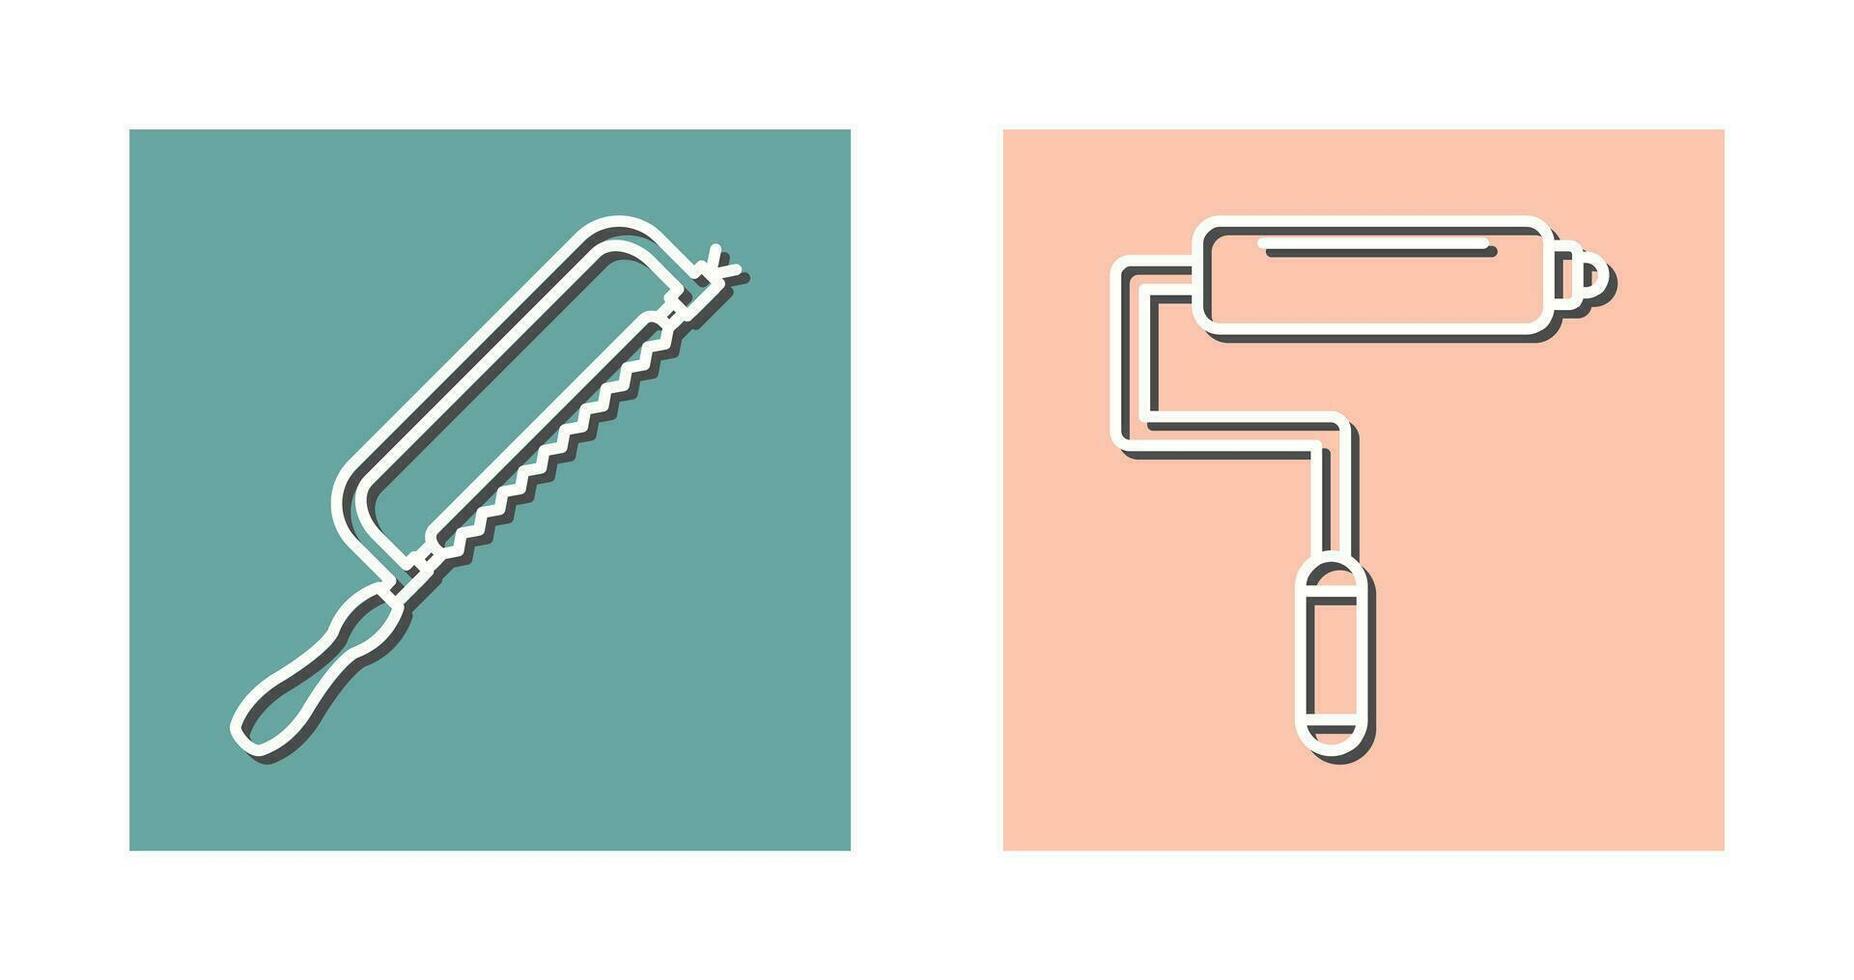 Hacksaw and Paint Roller Icon vector